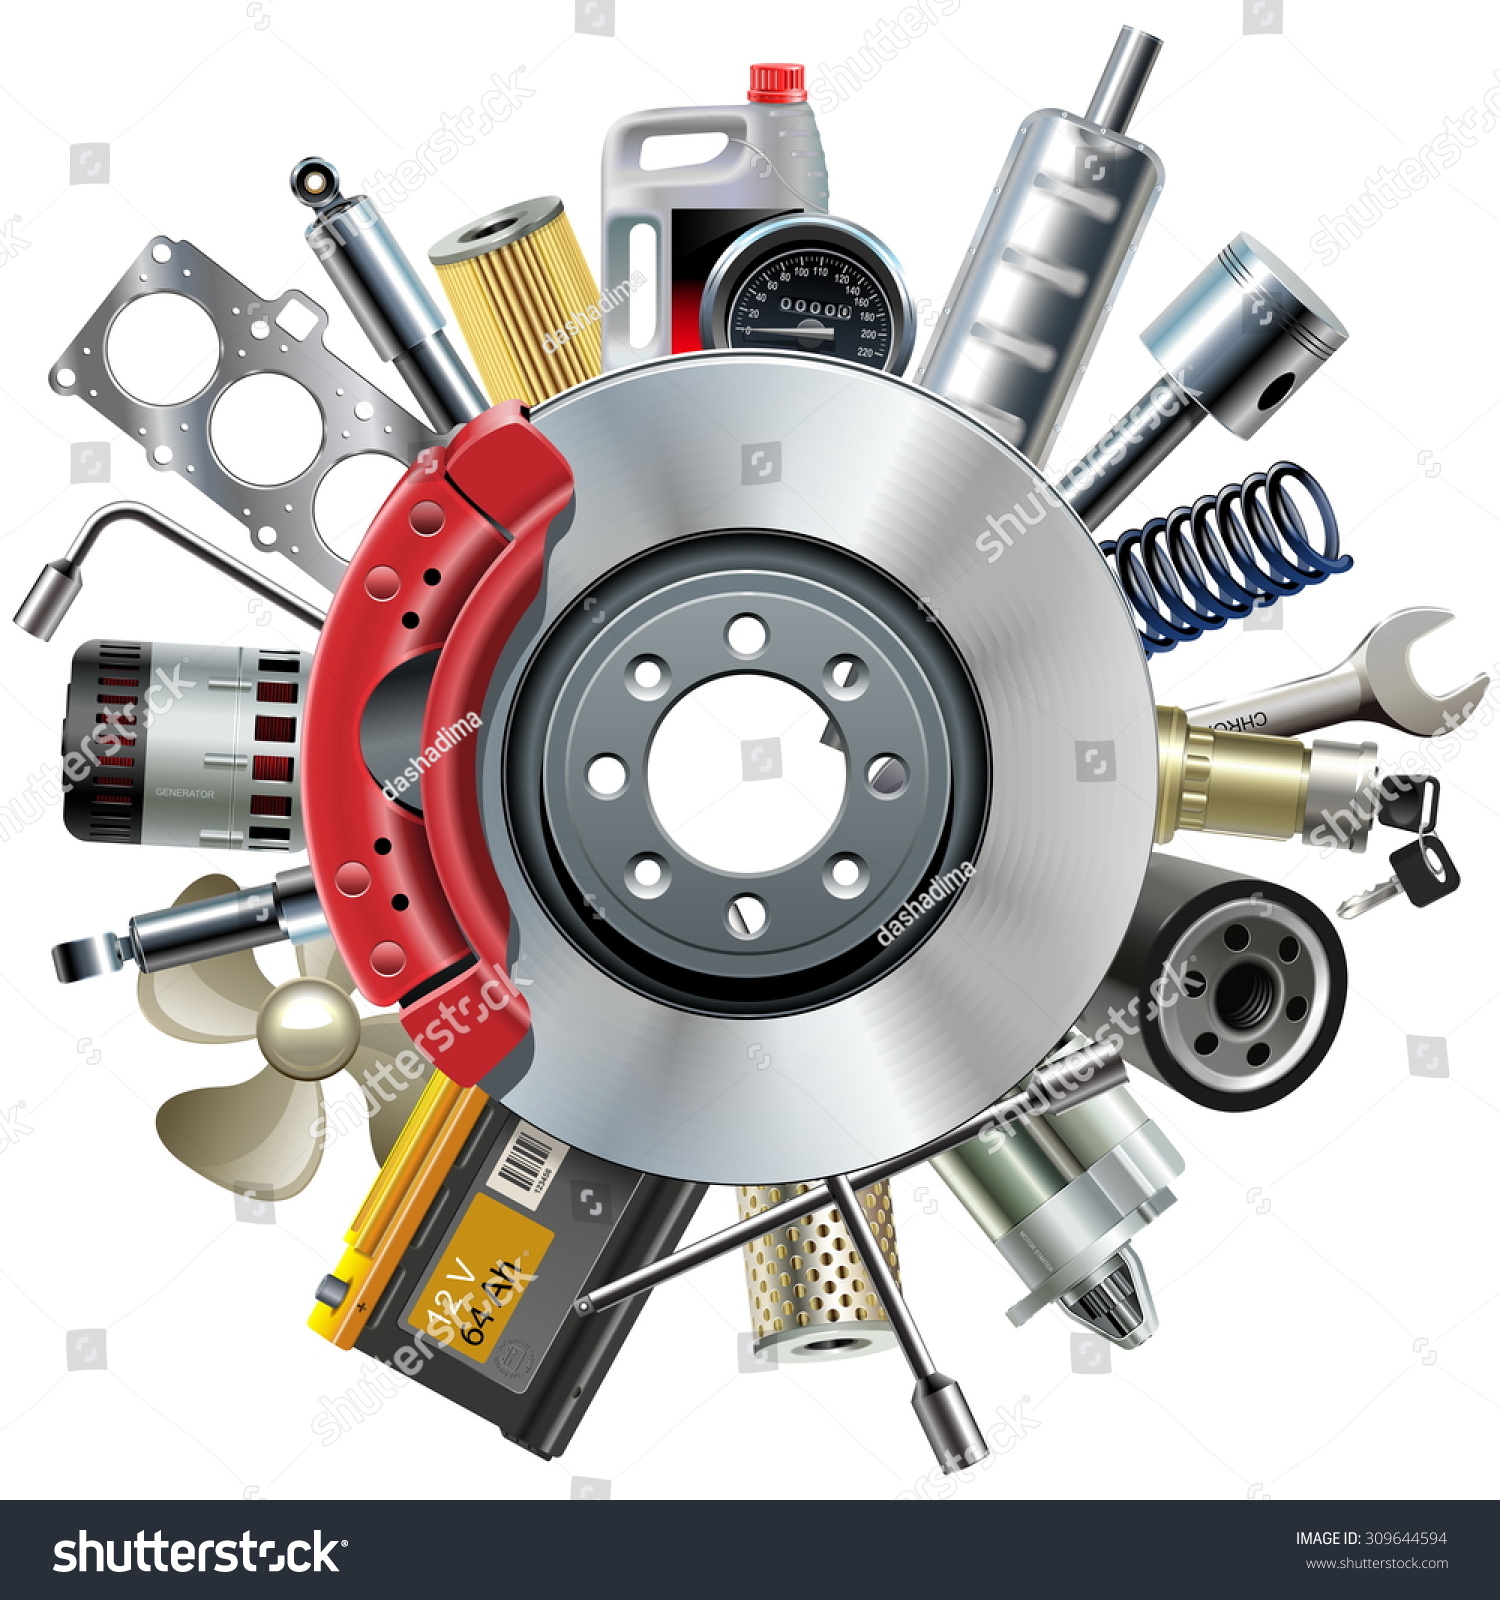 clipart of car brakes - photo #22